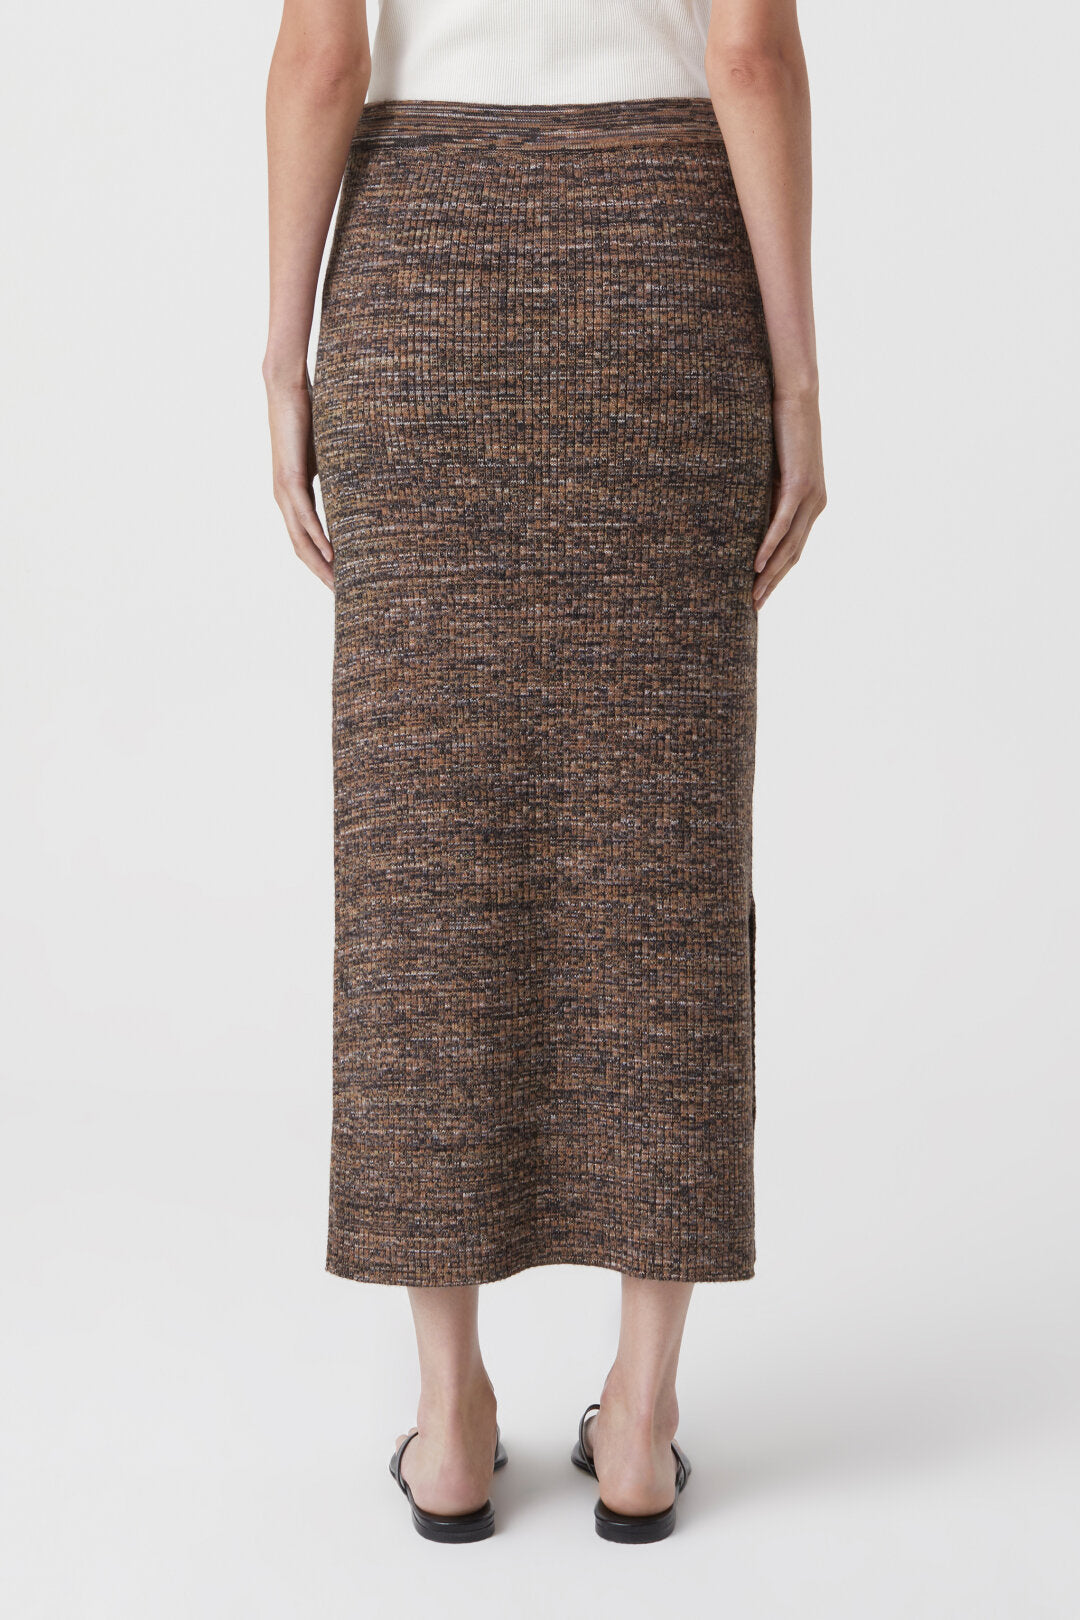 KNITTED PENCIL SKIRT - HEATHER